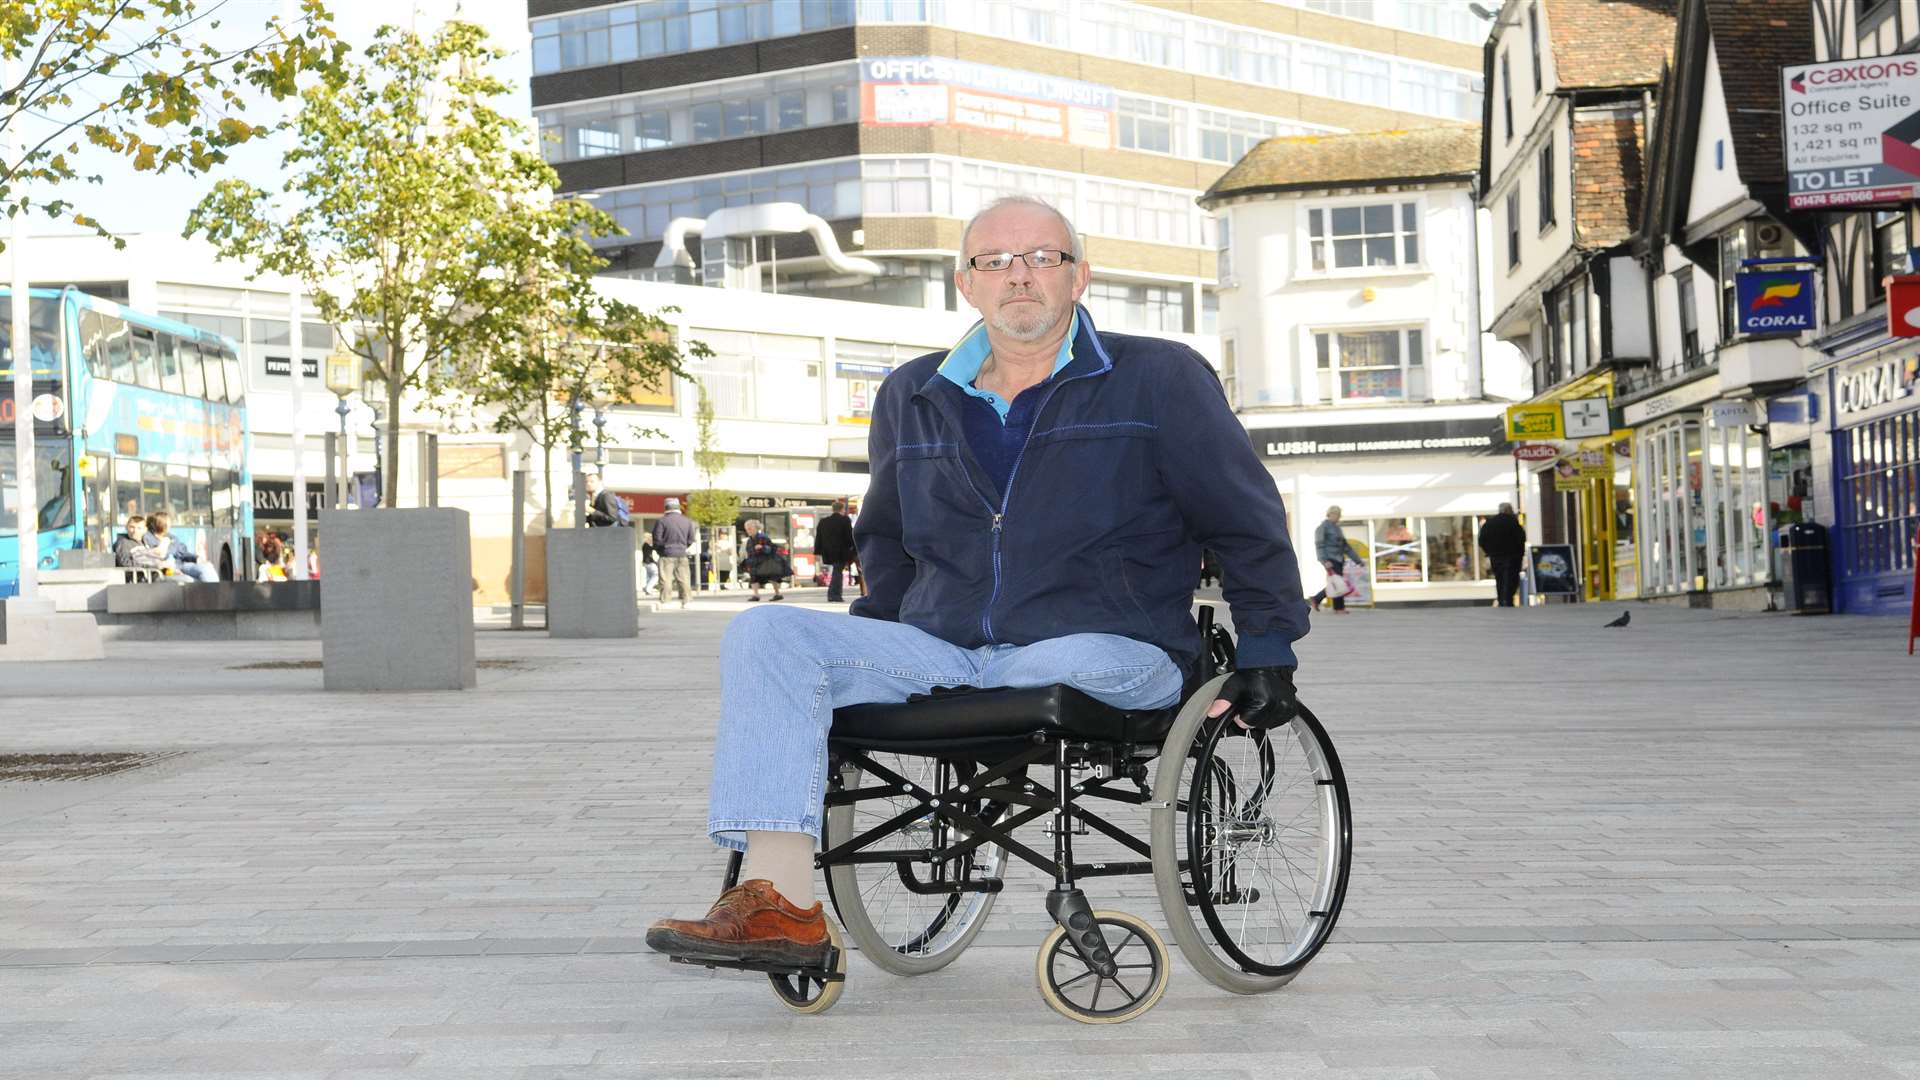 Cllr Stephen Beerling is speaking out to make people aware of problems faced by wheelchair users in Maidstone.